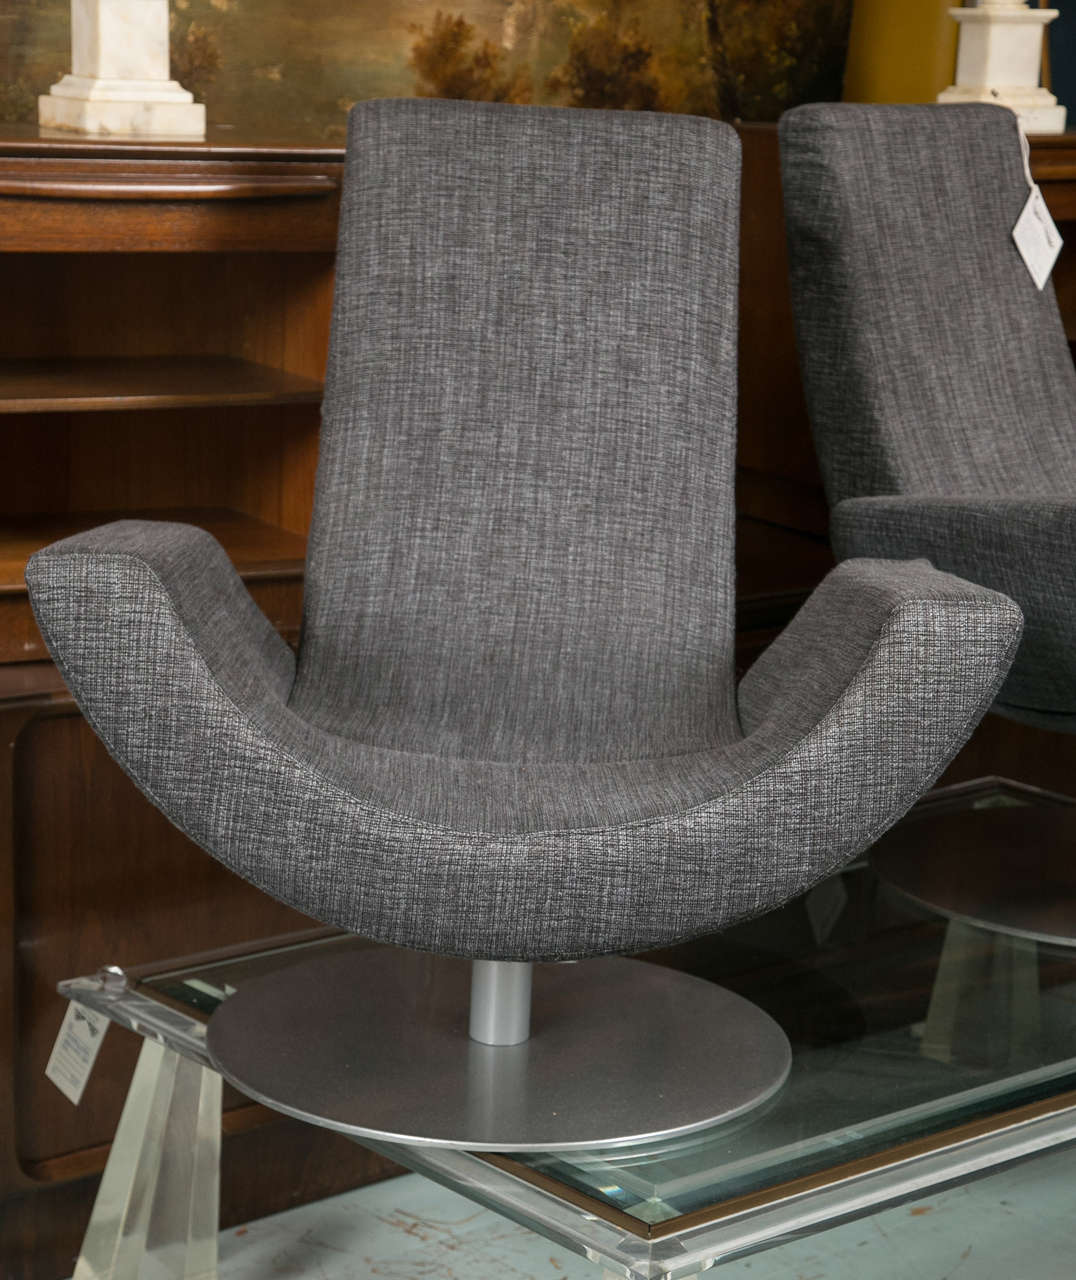 Pair Italian Arketipo Fly Chairs by Mansoni and Tapinassi. High-backed armchair with swivel base and a slender line which offers an elevated degree of comfort, ideal for relaxation. The frame padding is made of cold expanded polyurethane and it has